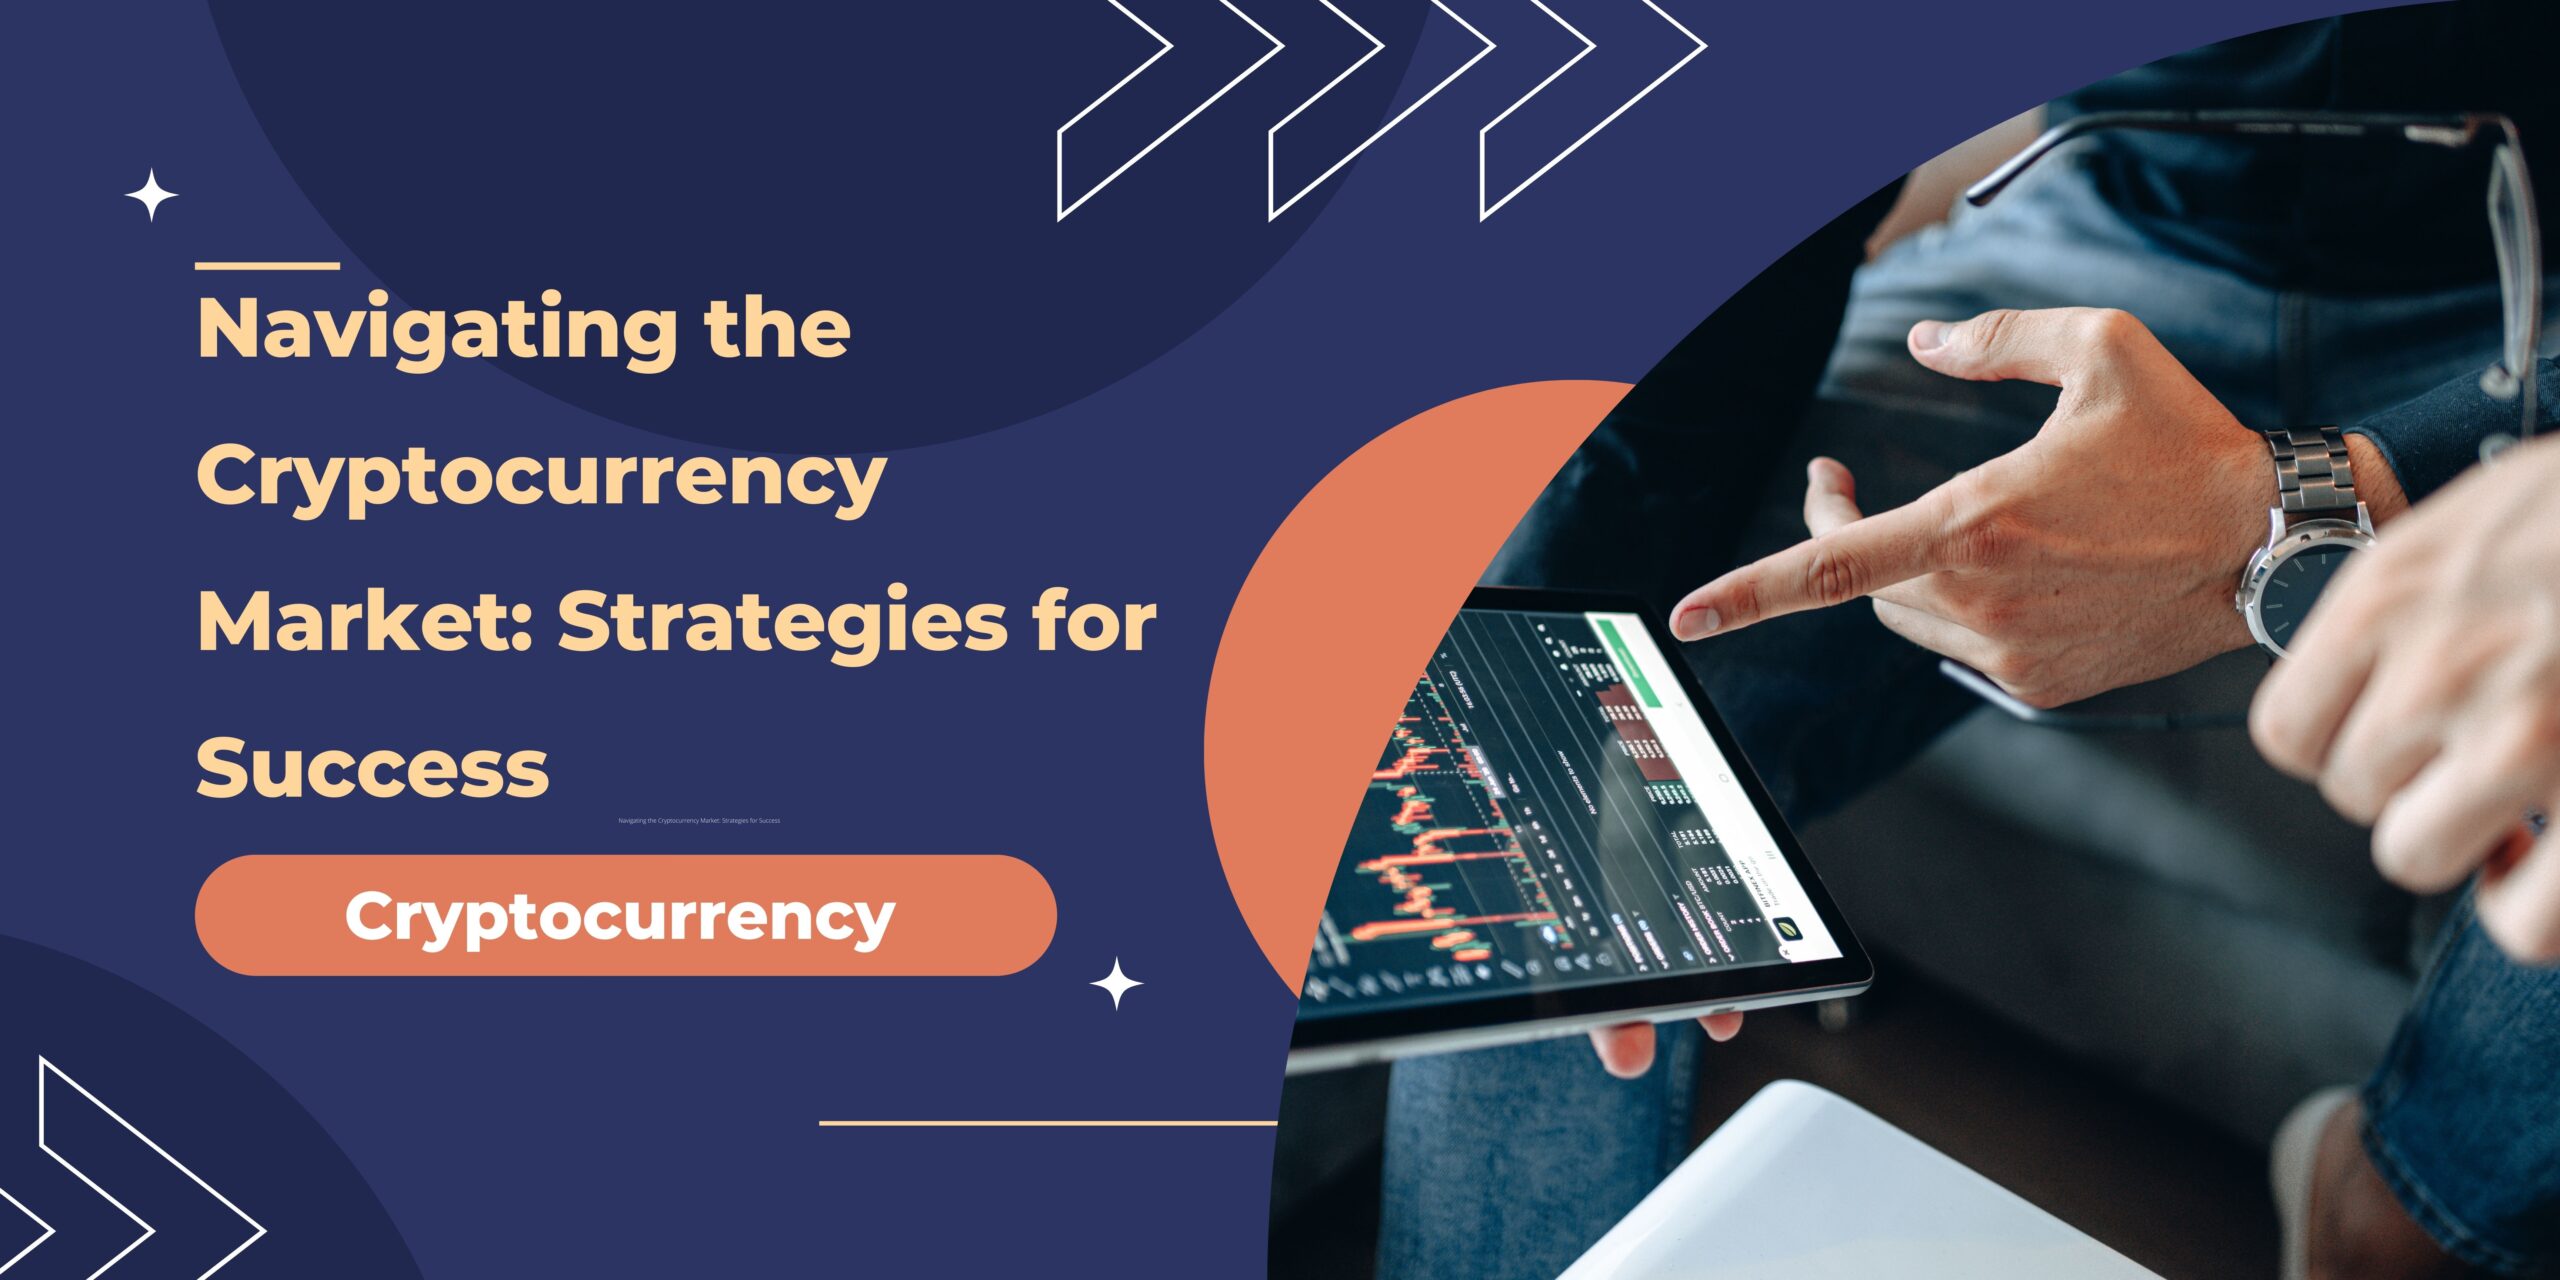 Navigating the Cryptocurrency Market: Strategies for Success